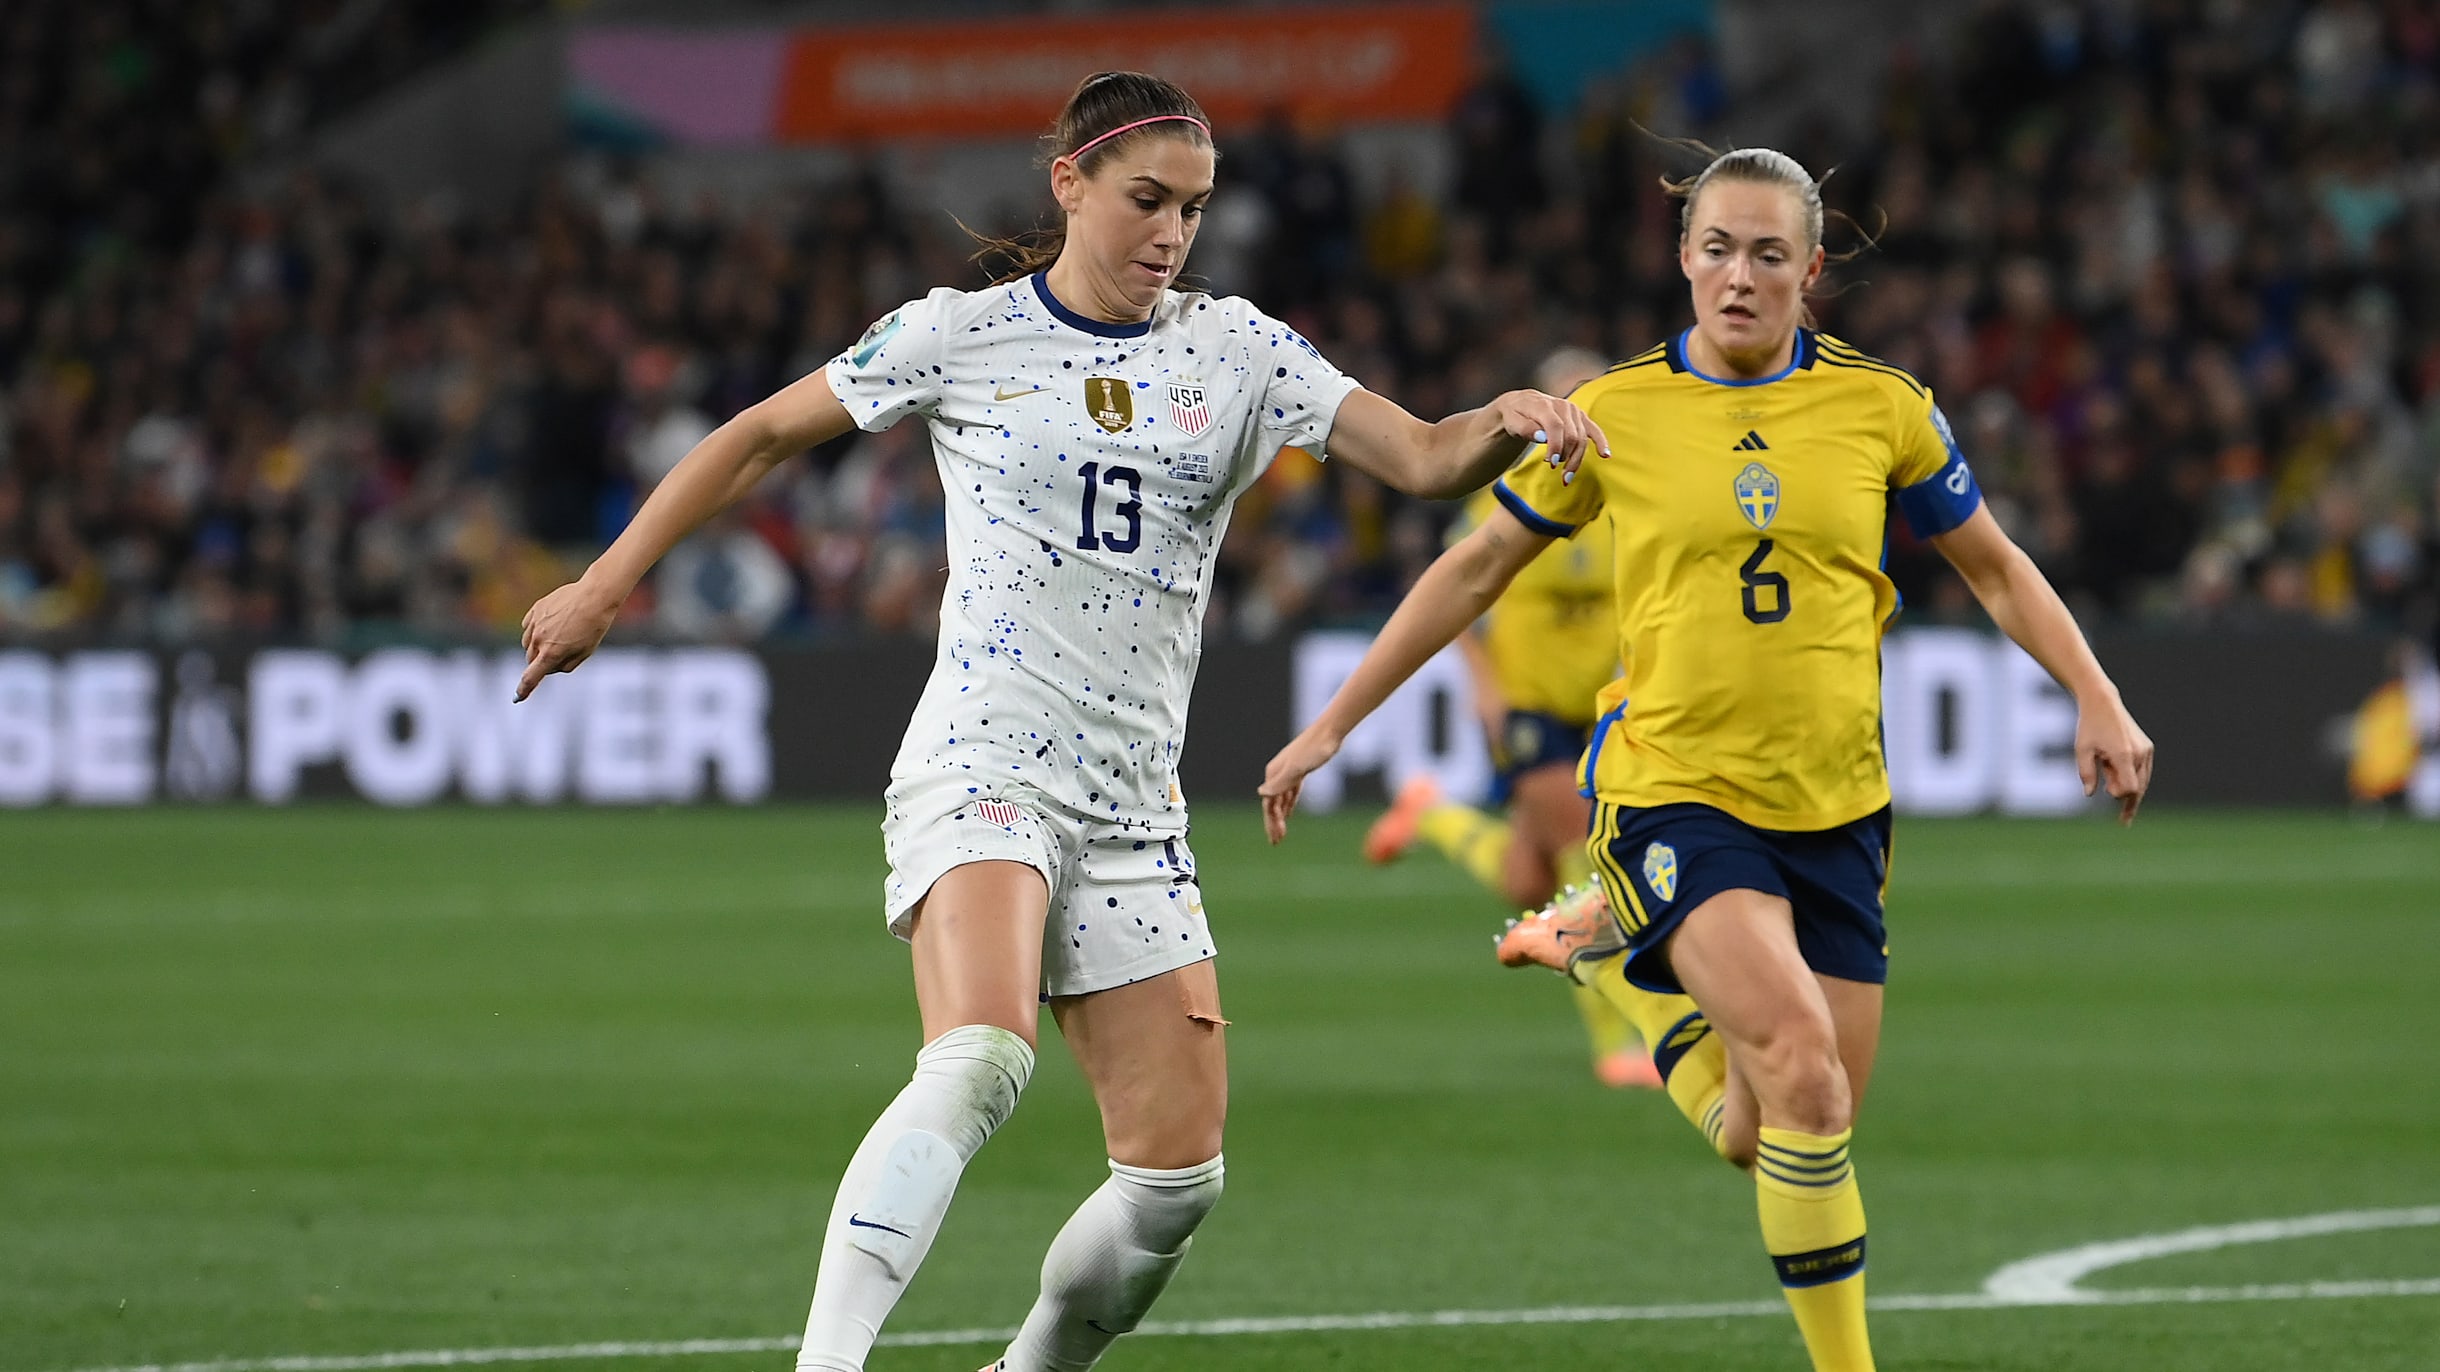 How to watch USWNT v South Africa soccer friendlies